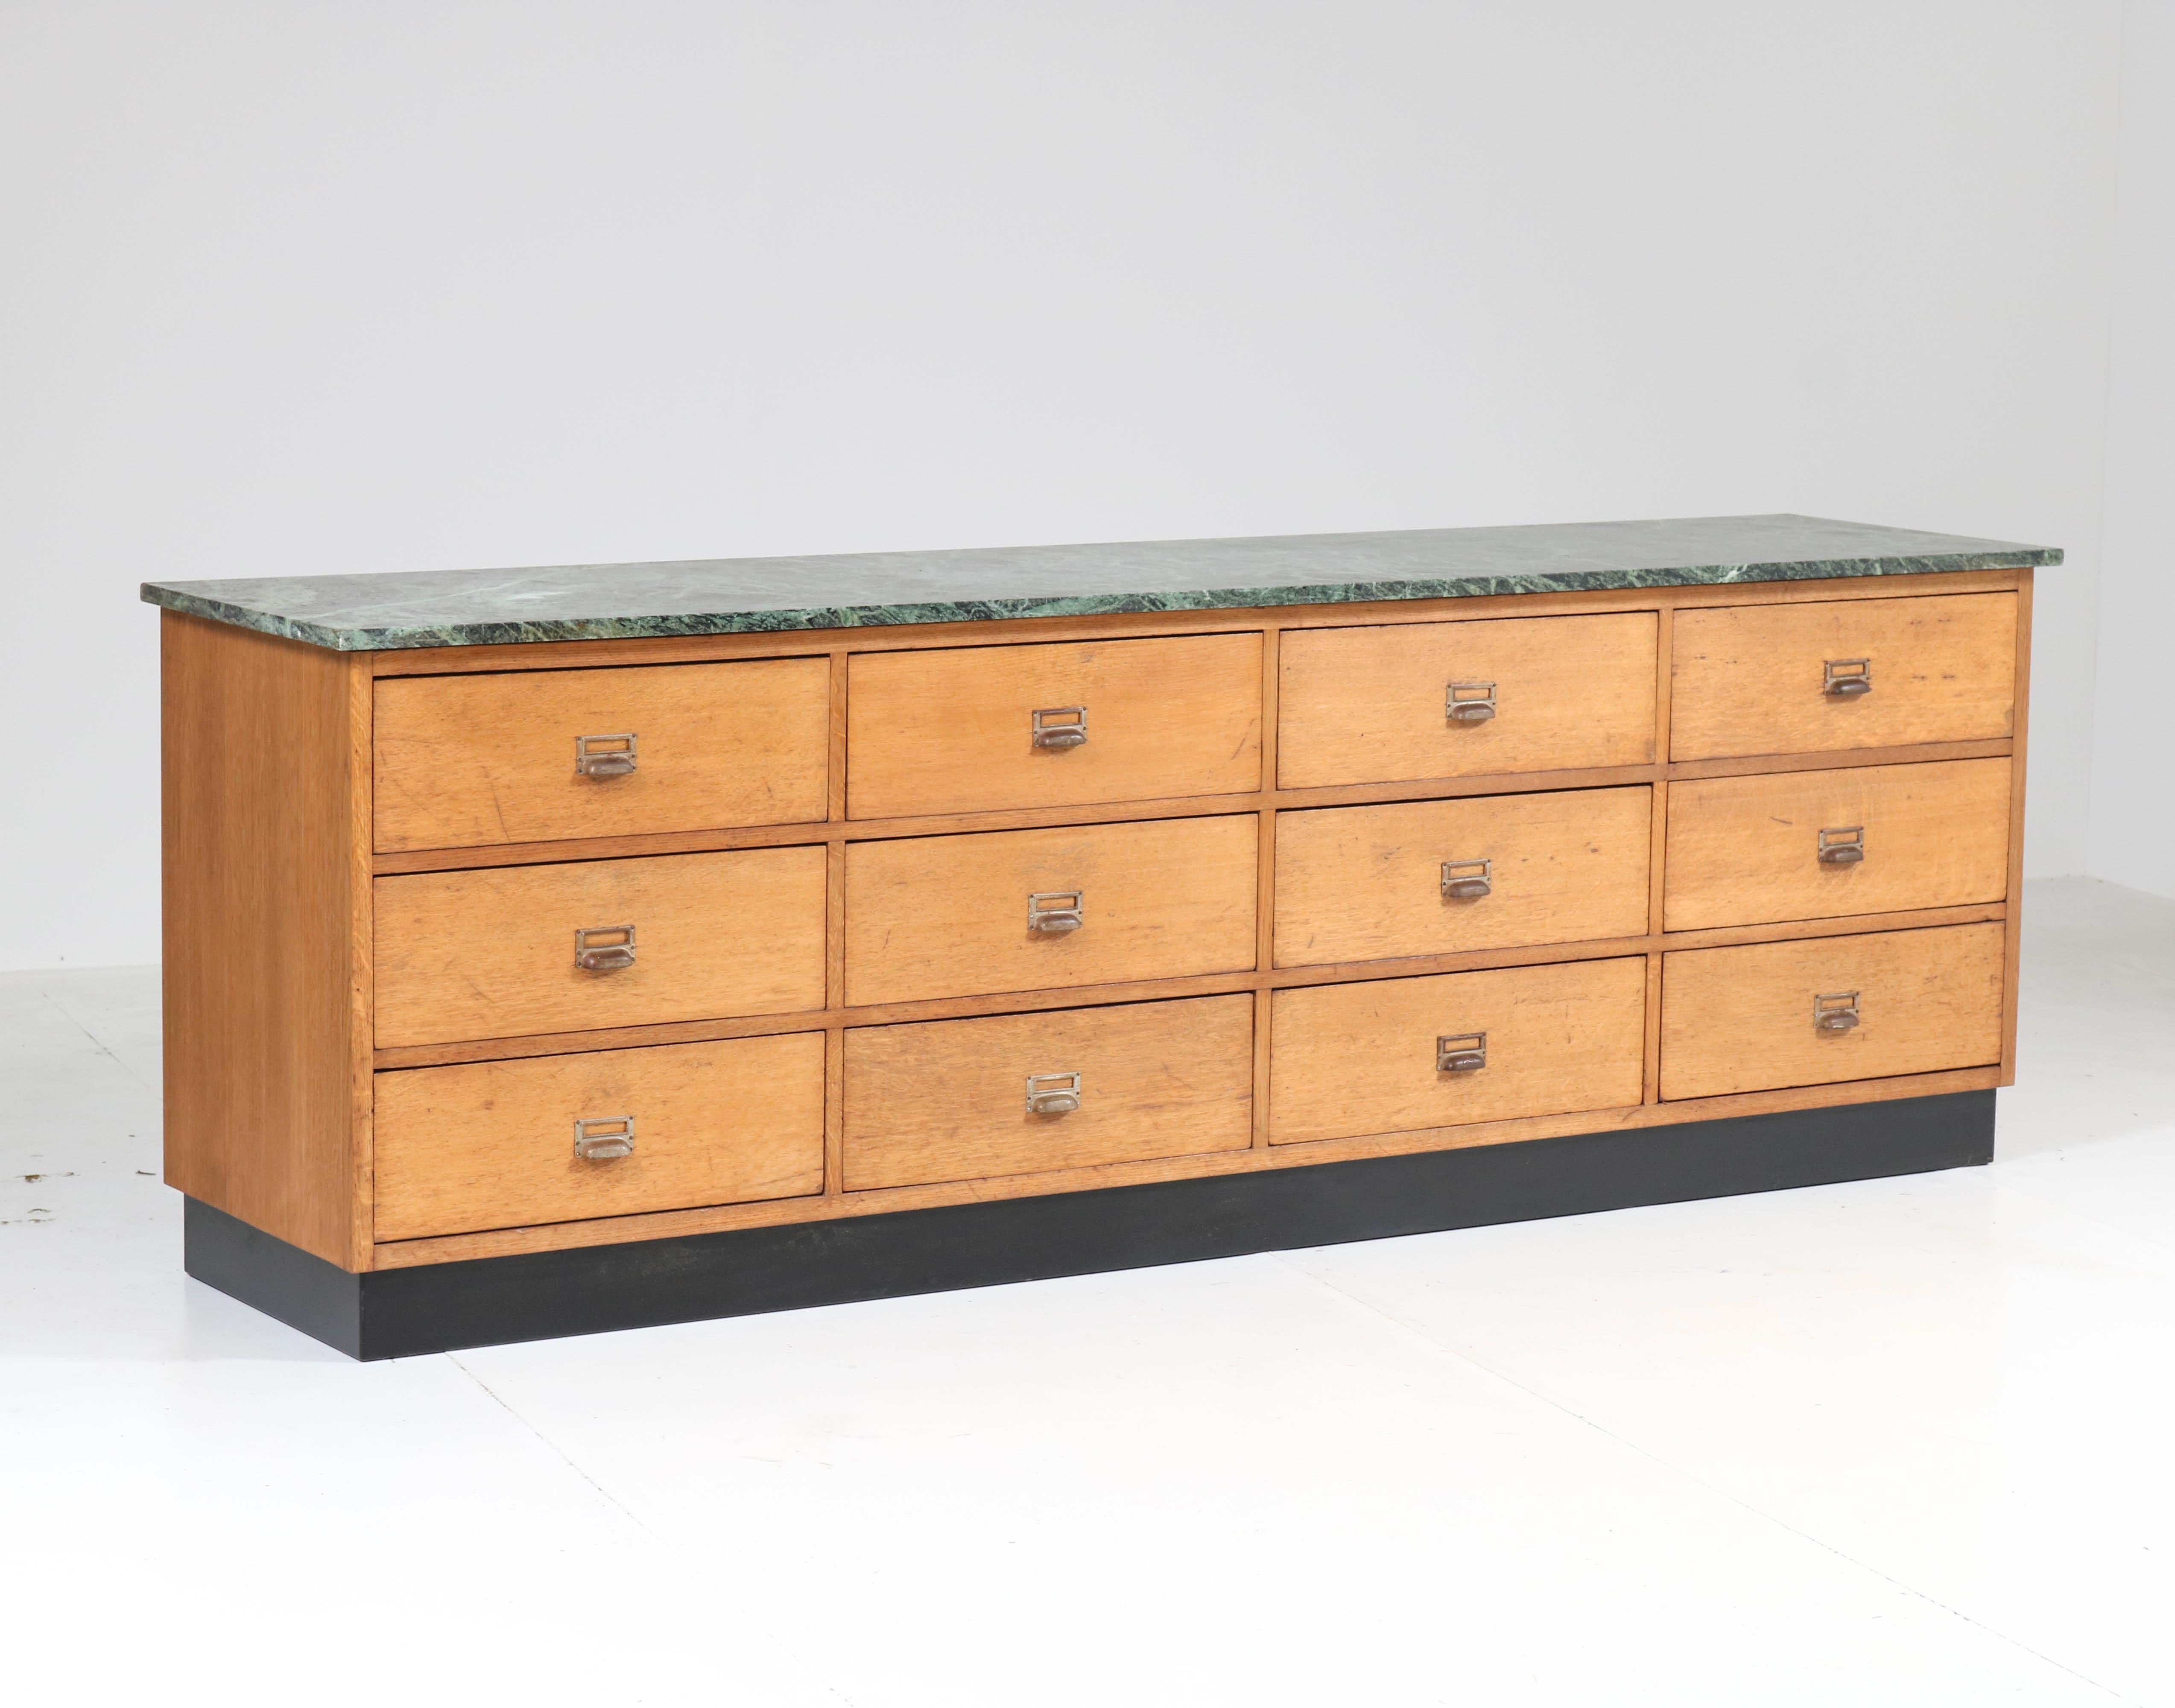 Magnificent and rare Art Deco Haagse School counter.
Striking Dutch design from the twenties.
Oak frame with 12 original drawers and Patricia Green marble top.
This wonderful piece of furniture is ideal for a shop, restaurant or kitchen etc.
You